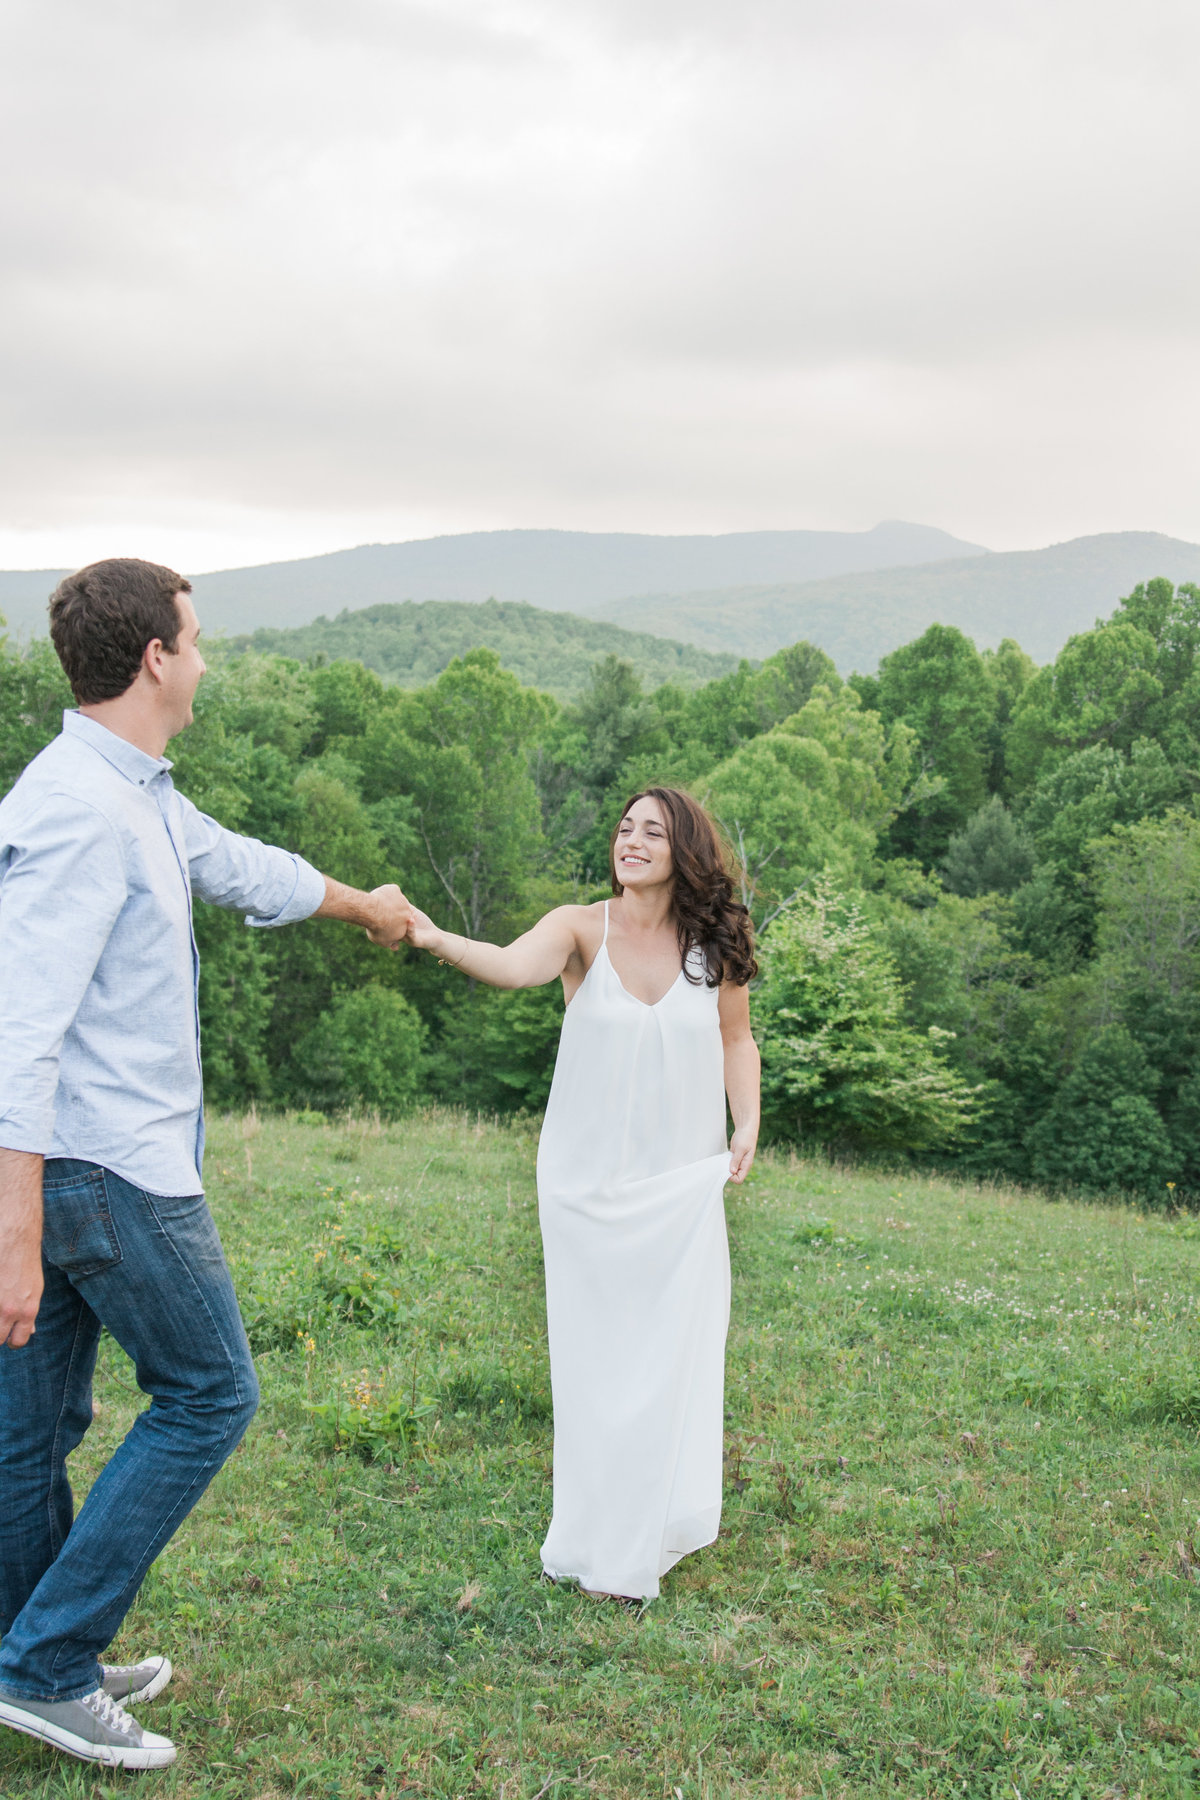 Adventurous engagement photographed at Tanawha Trail by Boone Photographer Wayfaring Wanderer.